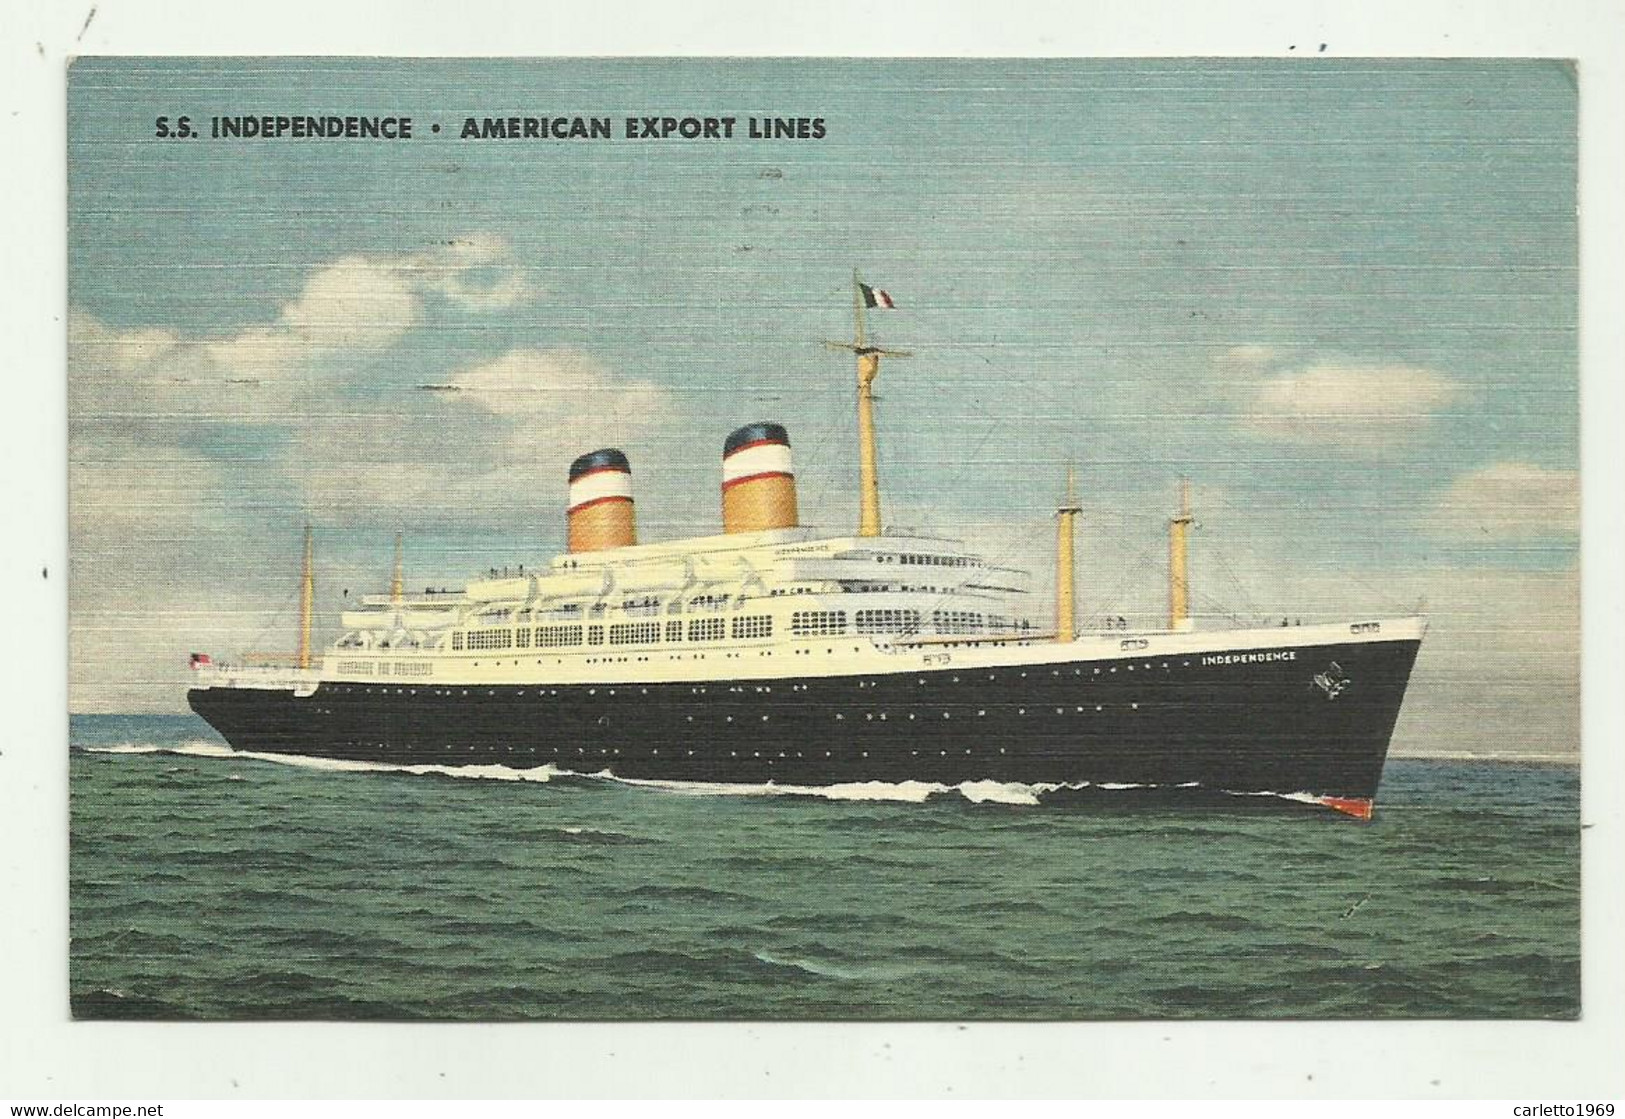 S.S. INDEPENDENCE - AMERICAN EXPORT LINES  - VIAGGIATA FP - Paquebots